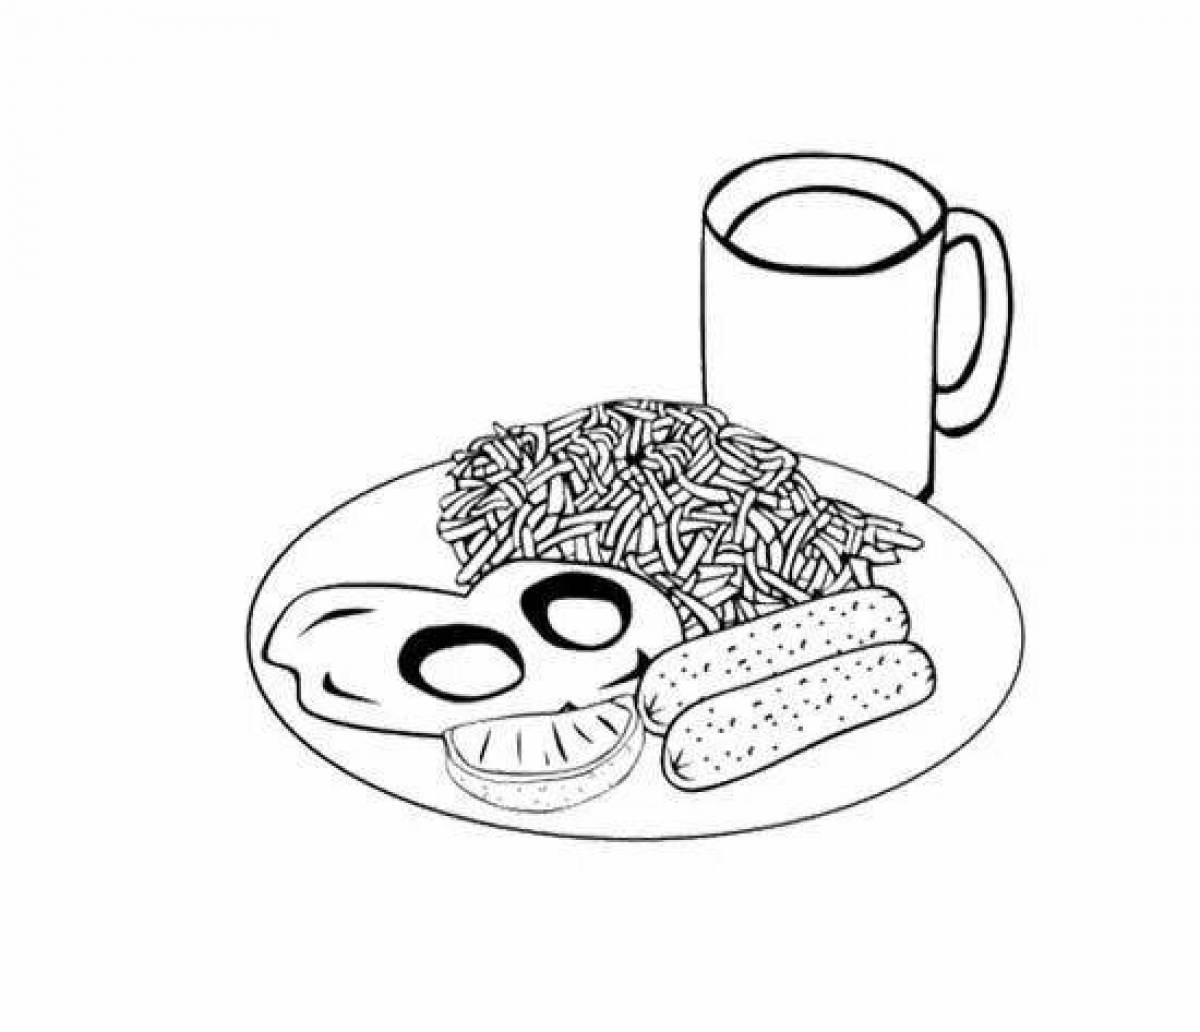 Nut breakfast coloring page